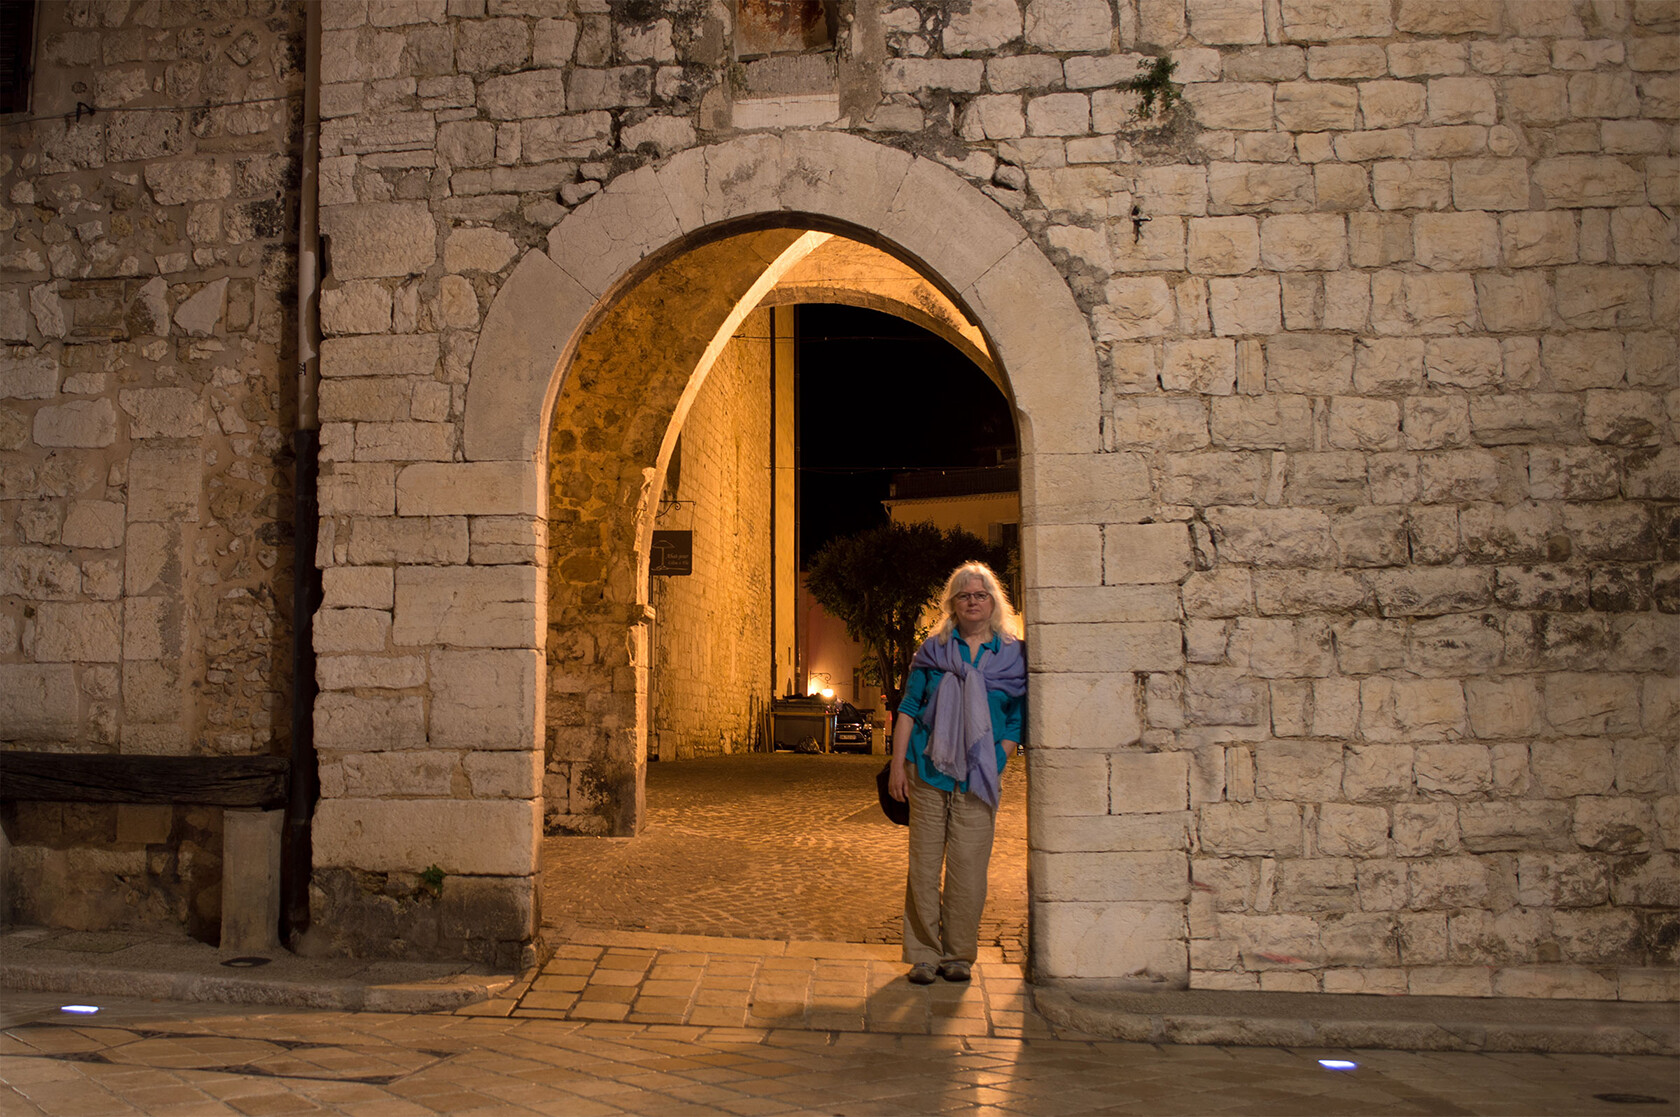 Carole Richmond in the Vence old town at night